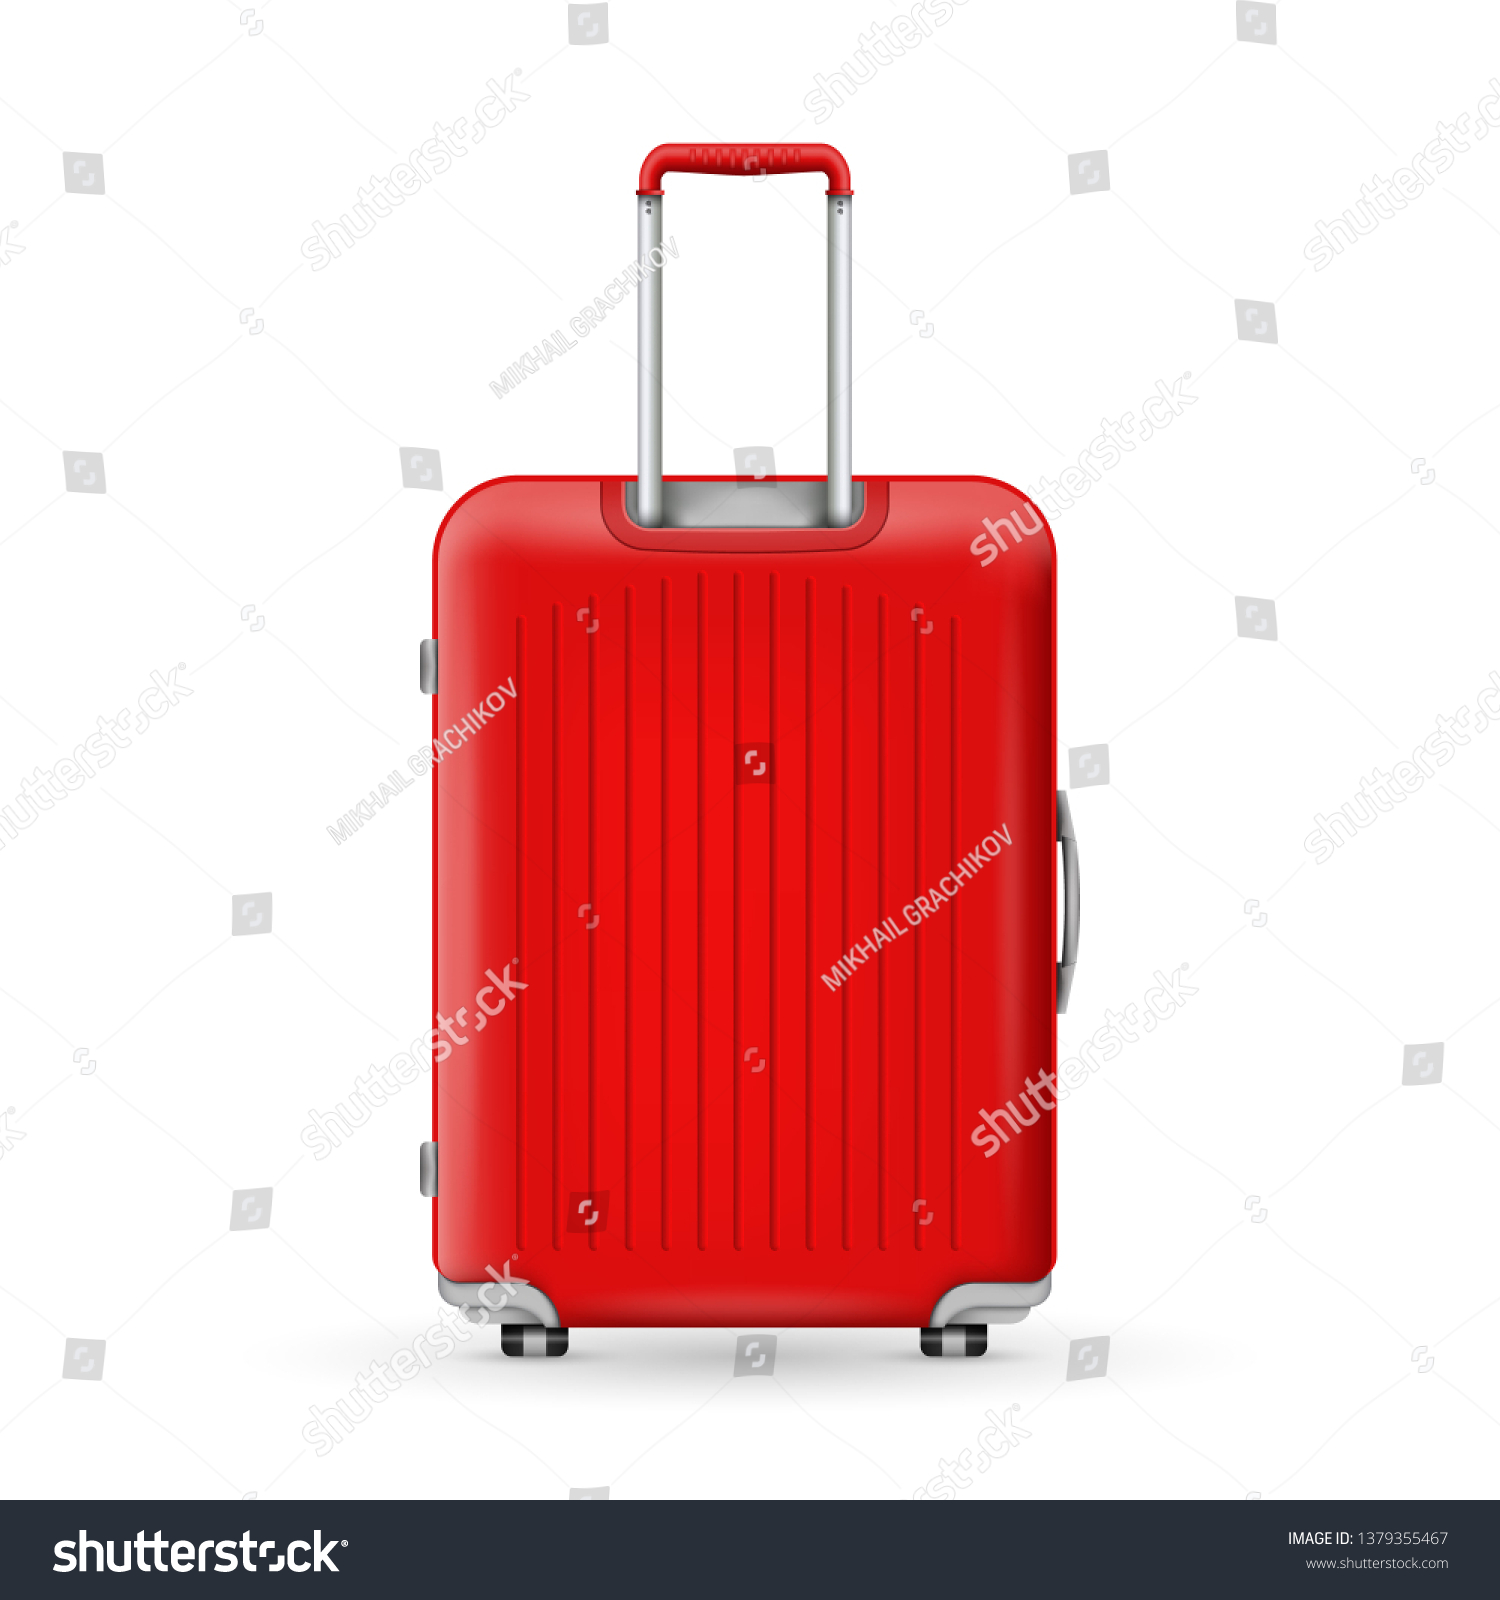 Creative illustration of realistic large polycarbonate travel plastic suitcase with wheels isolated on background. Art design traveler luggage. Abstract concept graphic element #1379355467